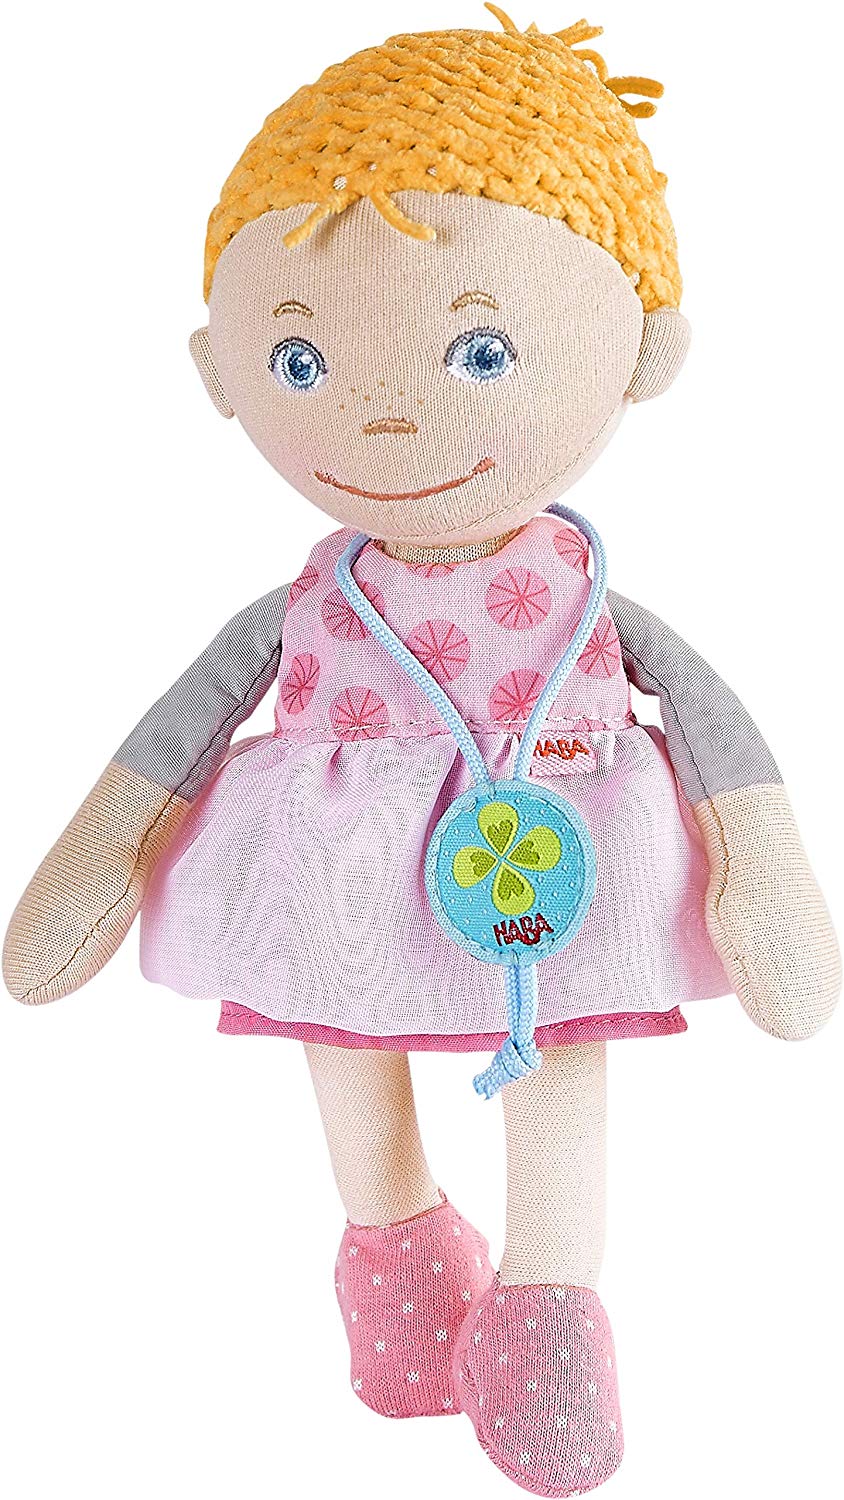 Haba Liv 304580 Protective Doll Lucky Charm For Children From 12 Months Wit